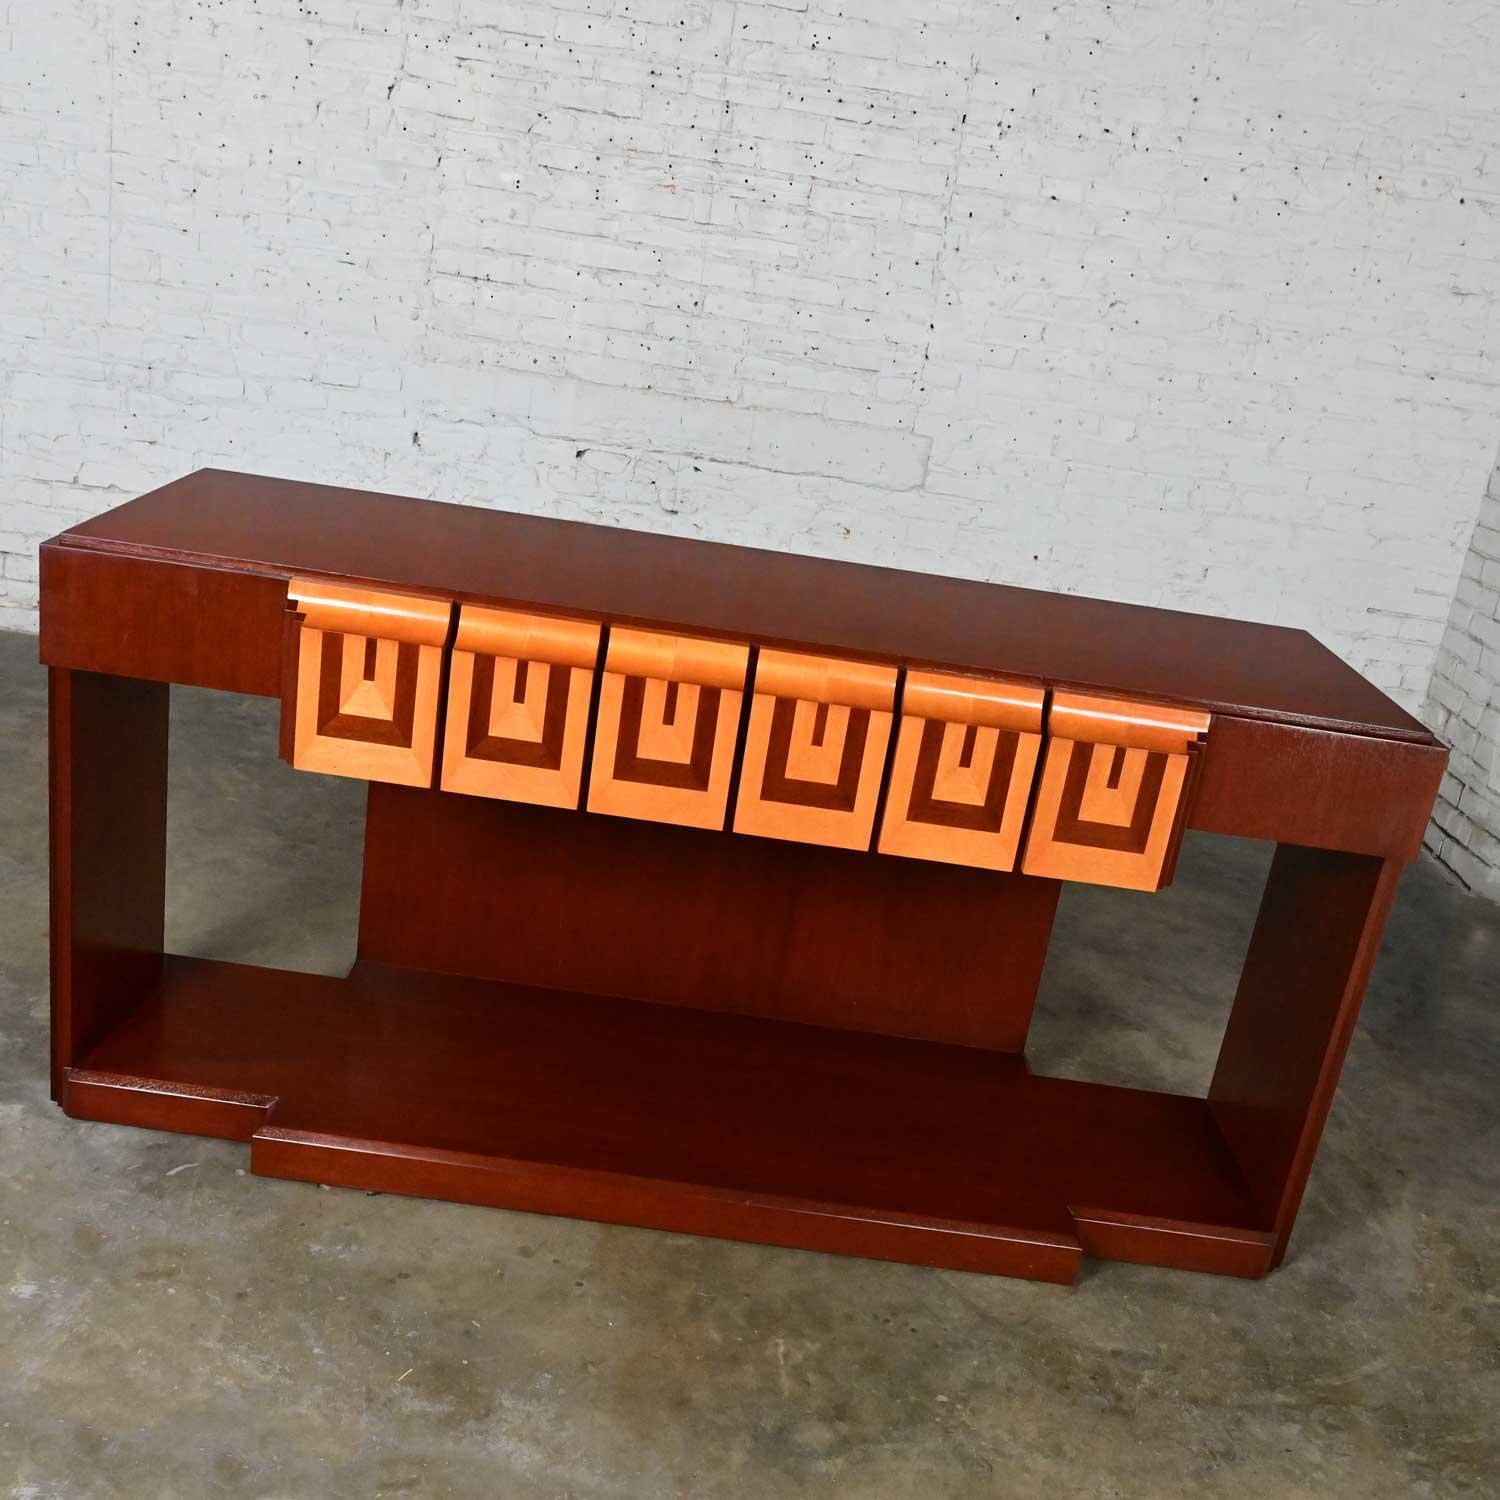 Superb vintage Art Deco Revival custom two-toned mahogany credenza or console made by Rialto & designed by Zlata Pericic for Meca Design & Production. Beautiful condition, keeping in mind that this is vintage and not new so will have signs of use